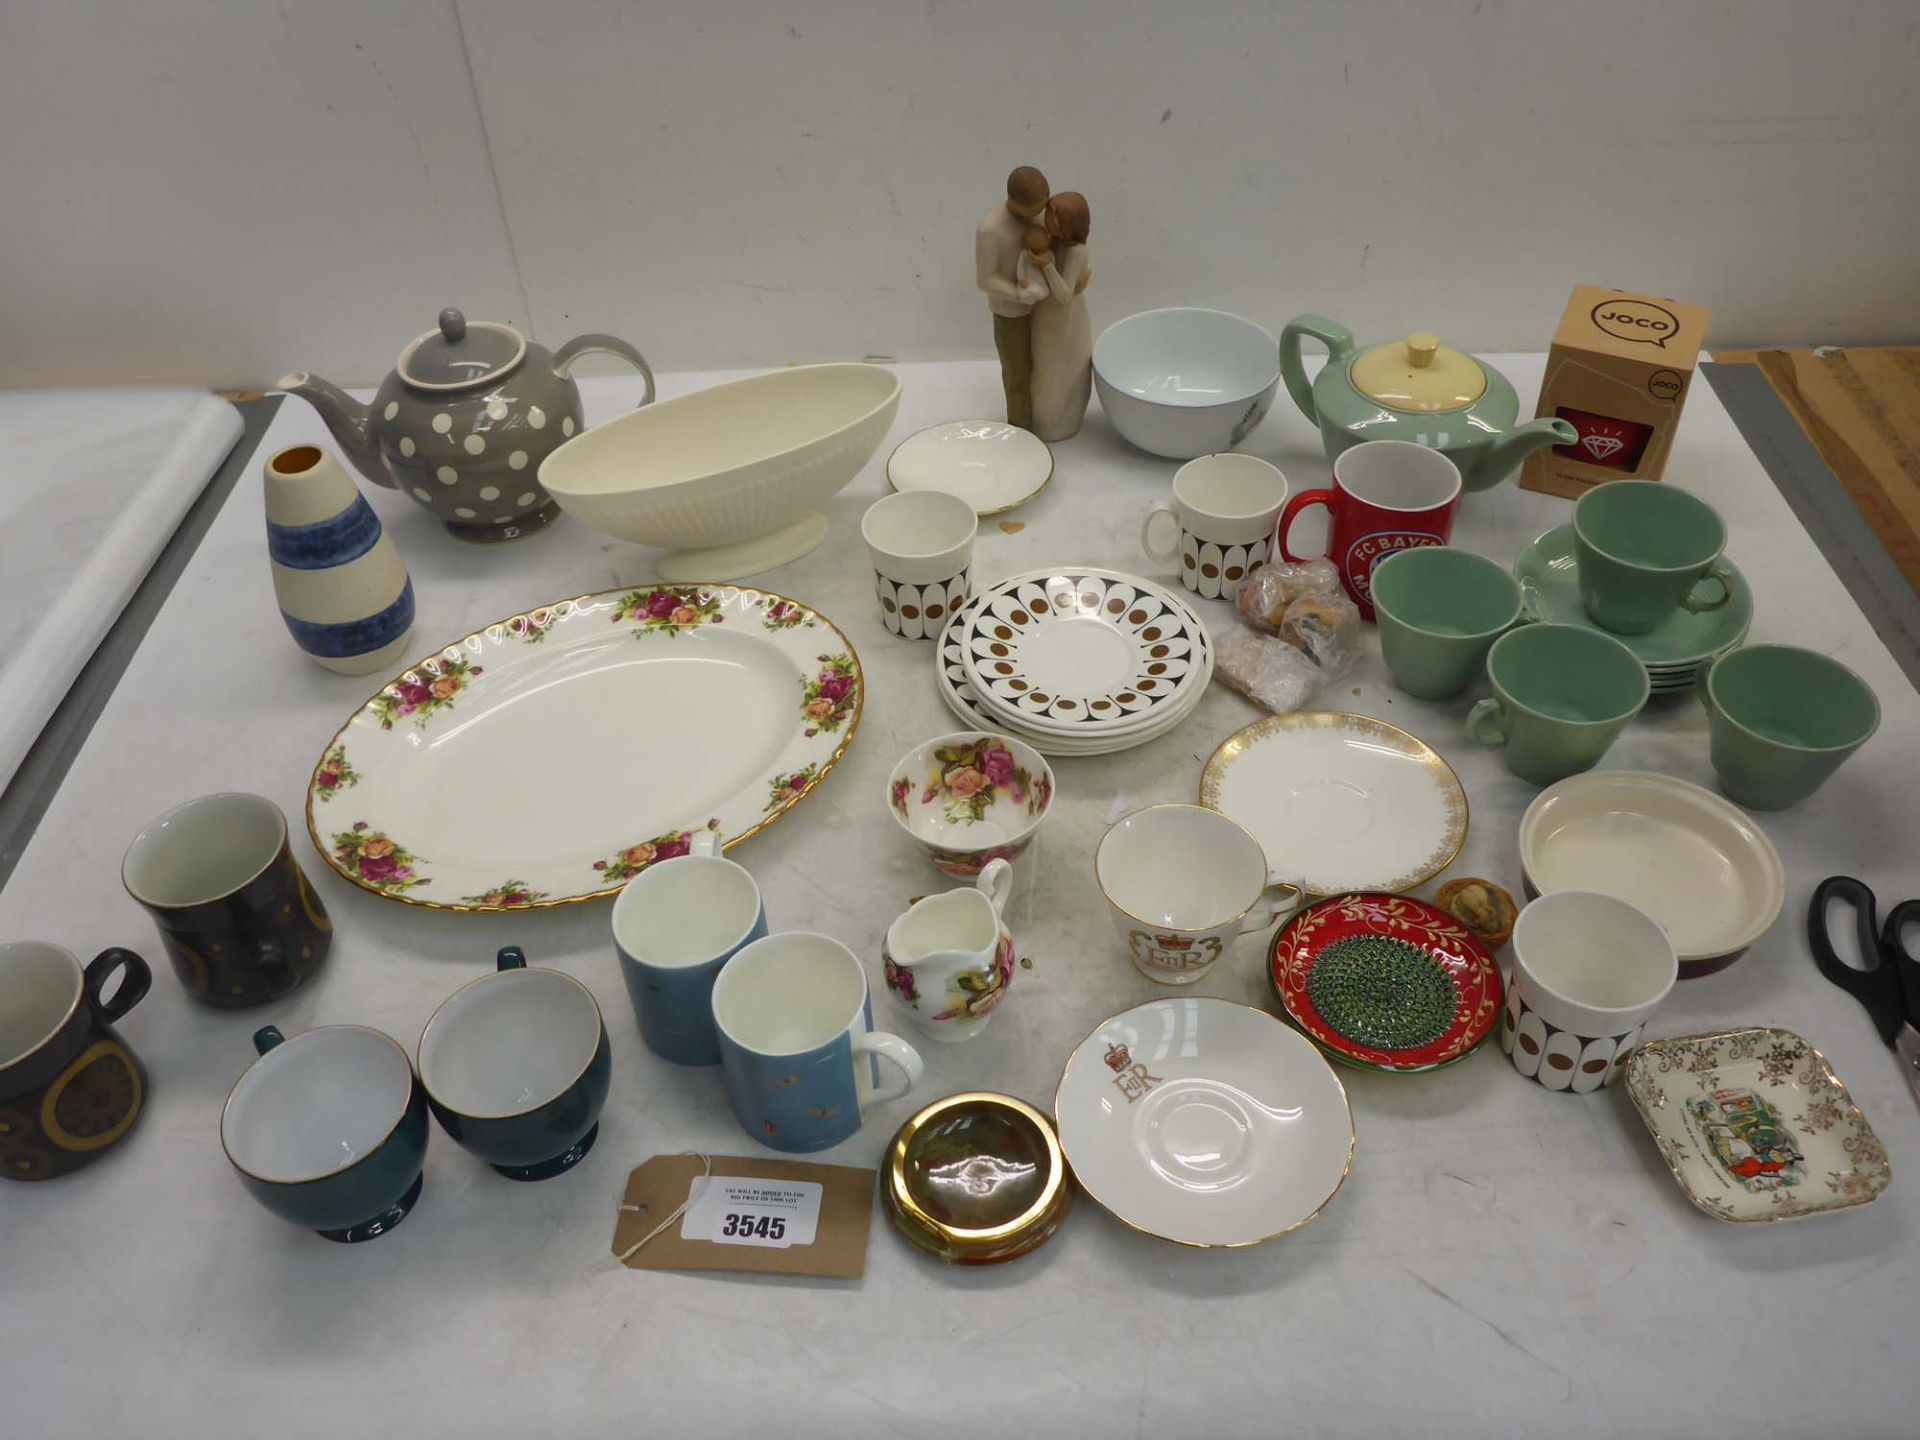 Selection of Royal Chelsea, Black Velvet, Denby, Wood's and other crockery Willow Tree ornament etc